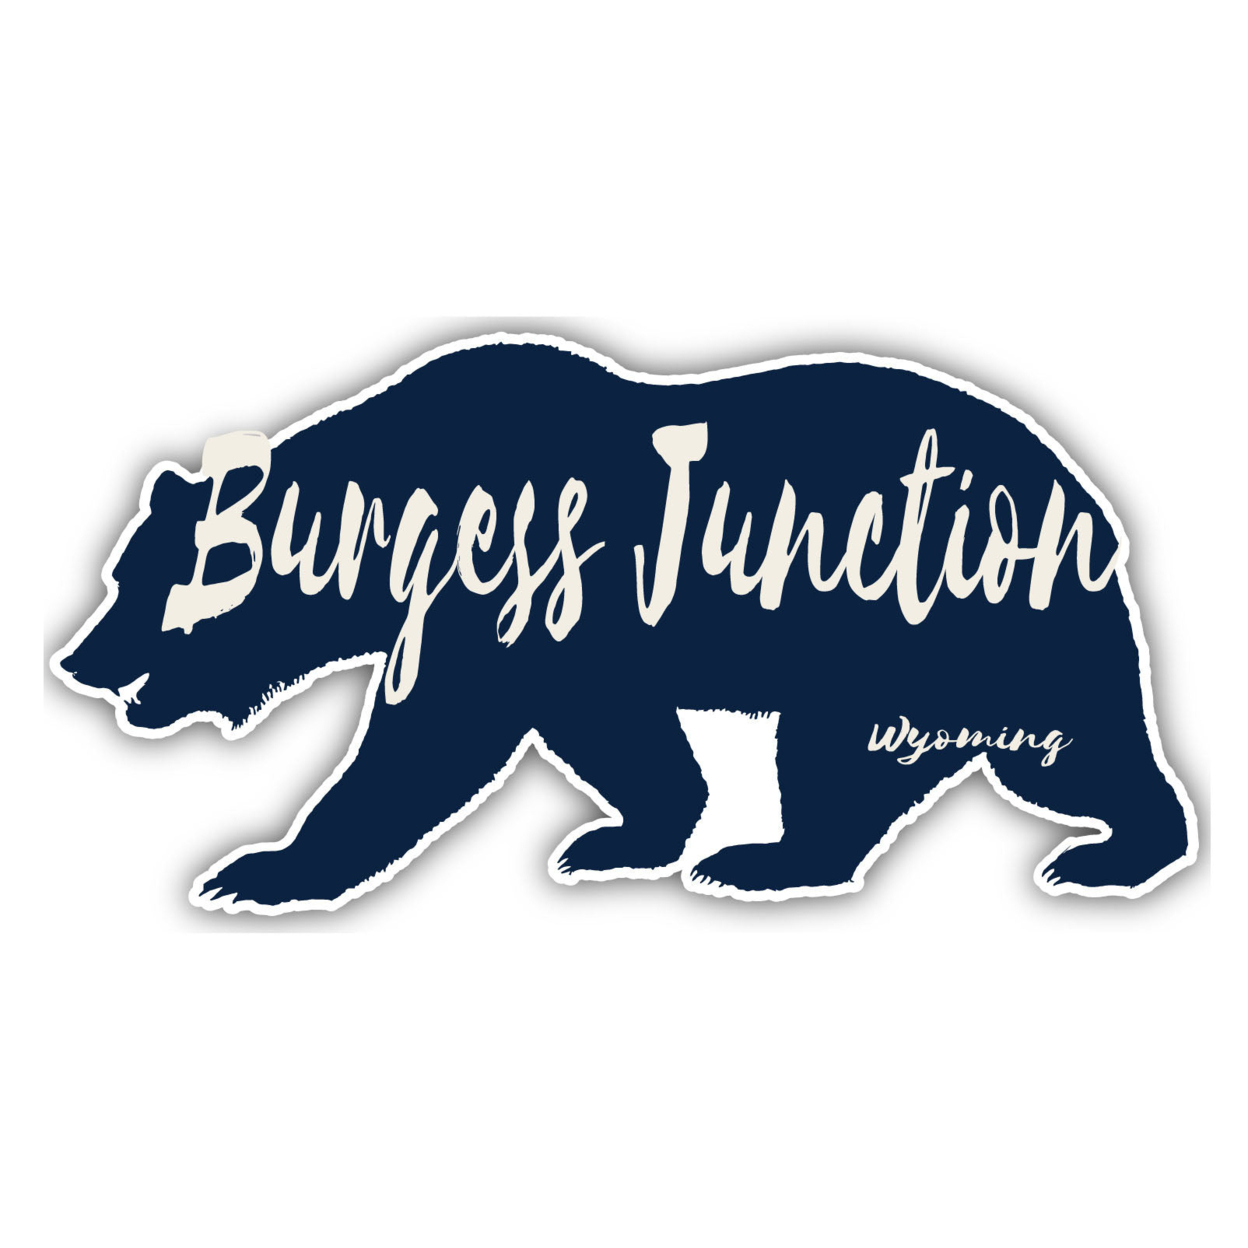 Burgess Junction Wyoming Souvenir Decorative Stickers (Choose Theme And Size) - Single Unit, 6-Inch, Adventures Awaits